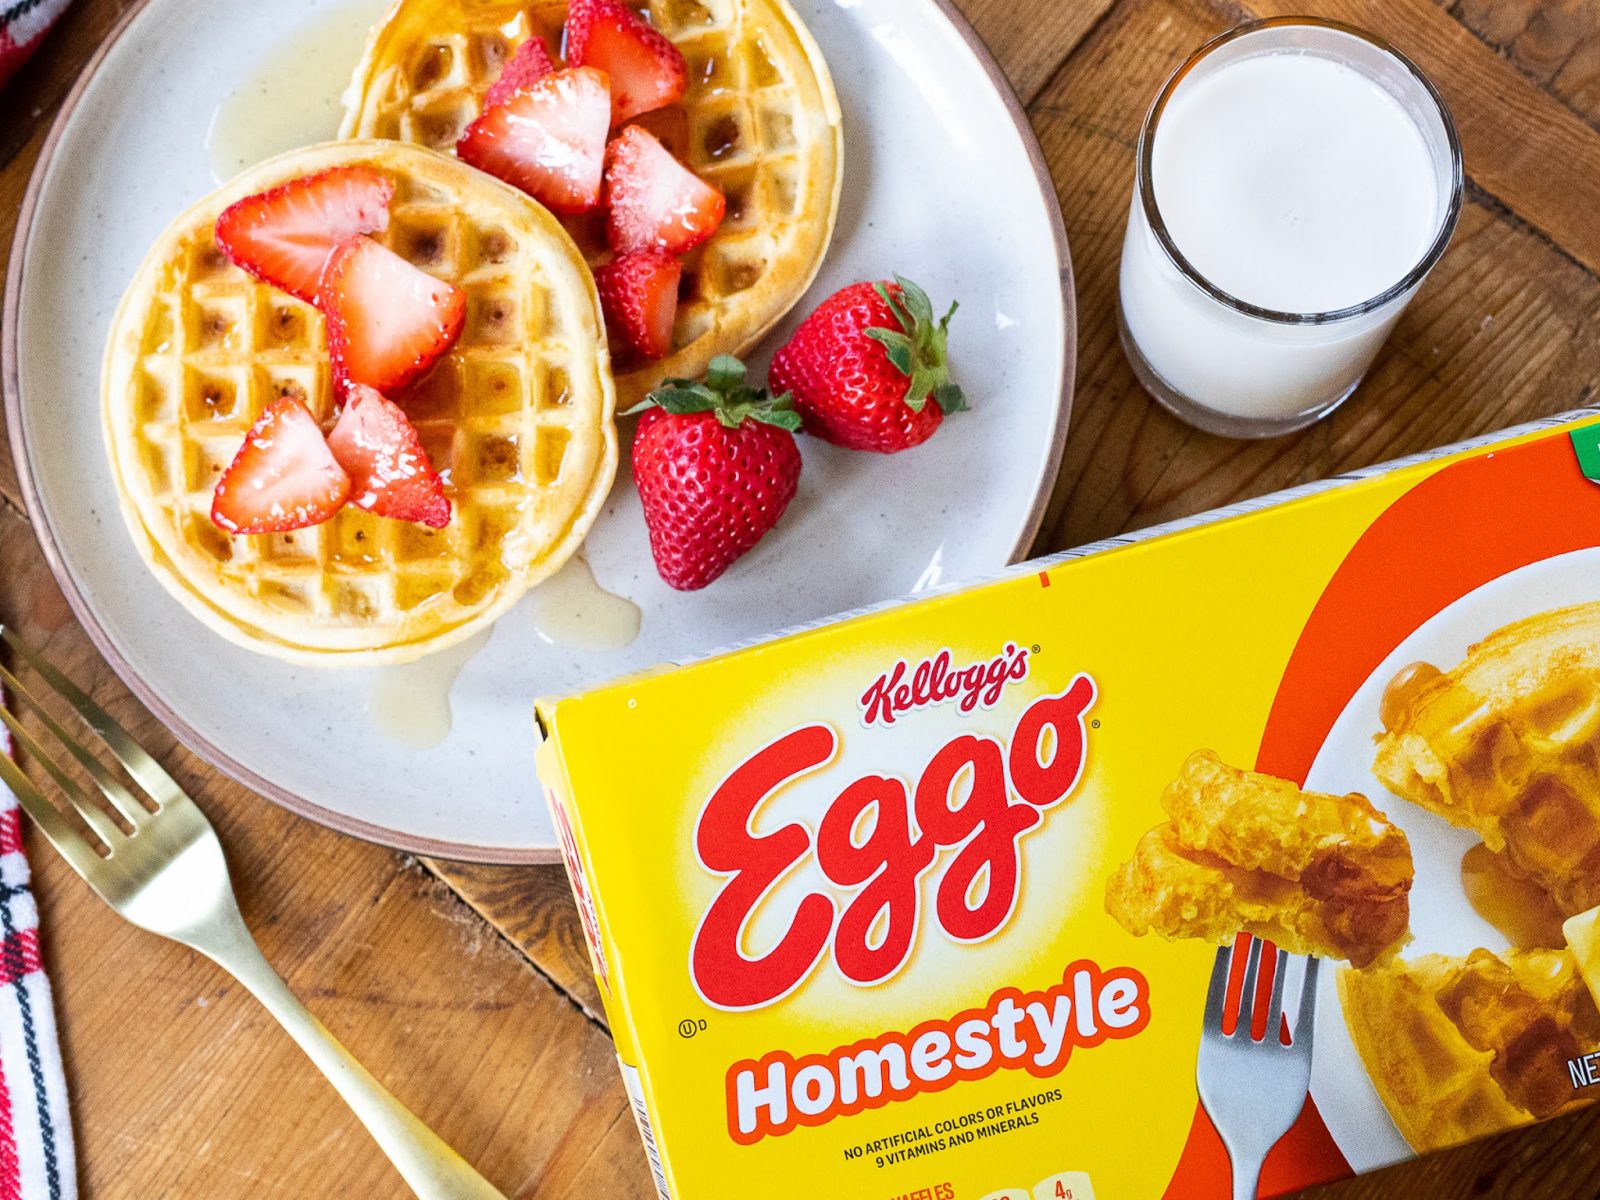 Get The Boxes Of Kellogg’s Eggo Waffles For Just $2.29 At Kroger